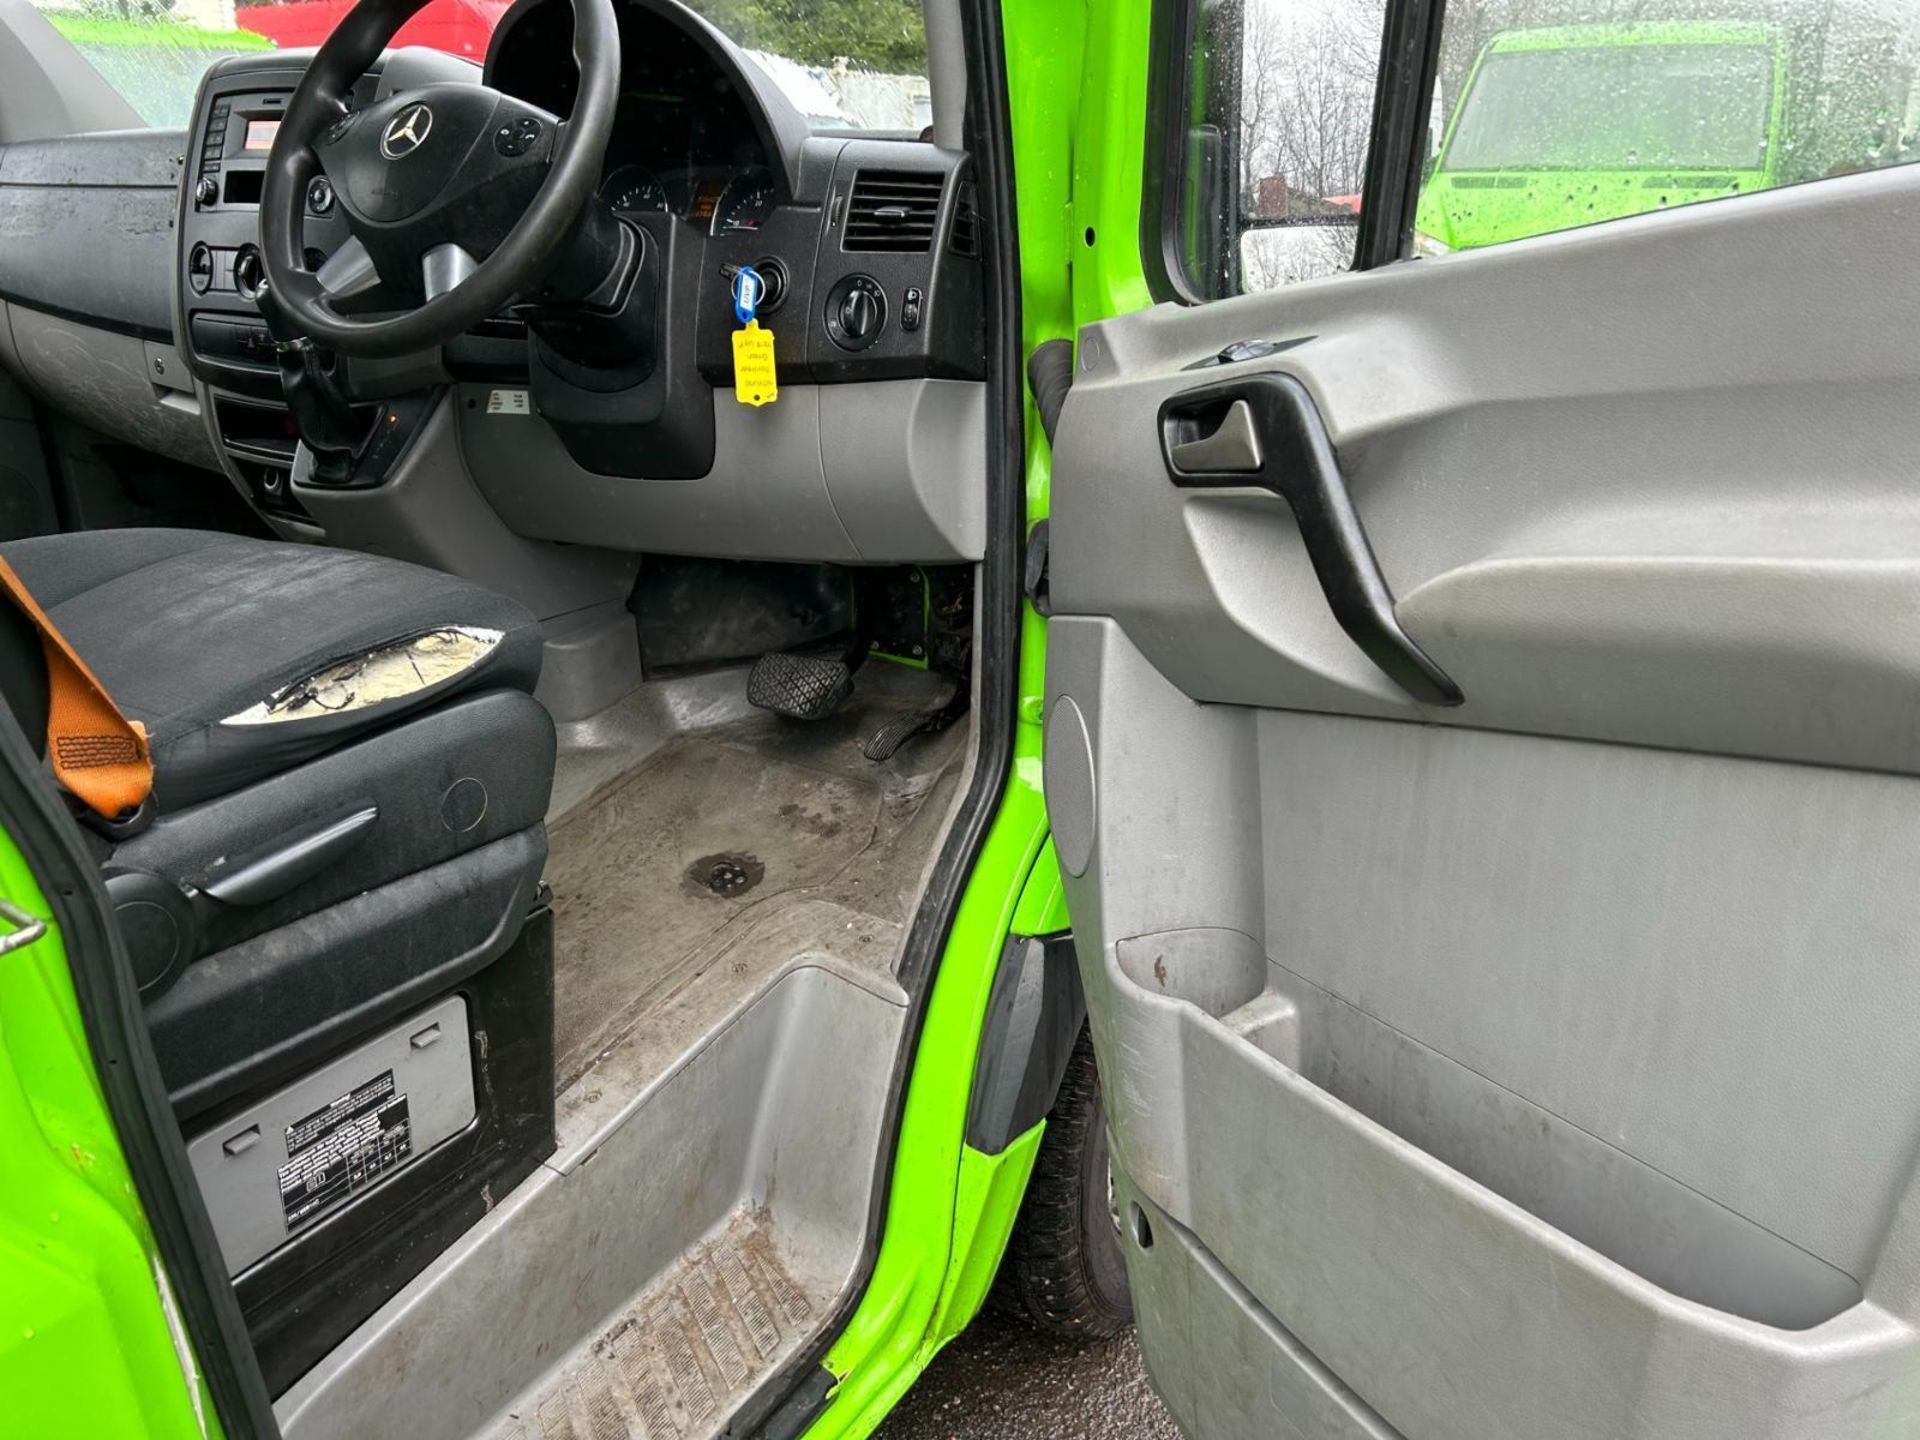 >>>SPECIAL CLEARANCE<<< 2018 MERCEDES-BENZ SPRINTER 314 CDI FRIDGE FREEZER CHASSIS CAB - Image 8 of 12